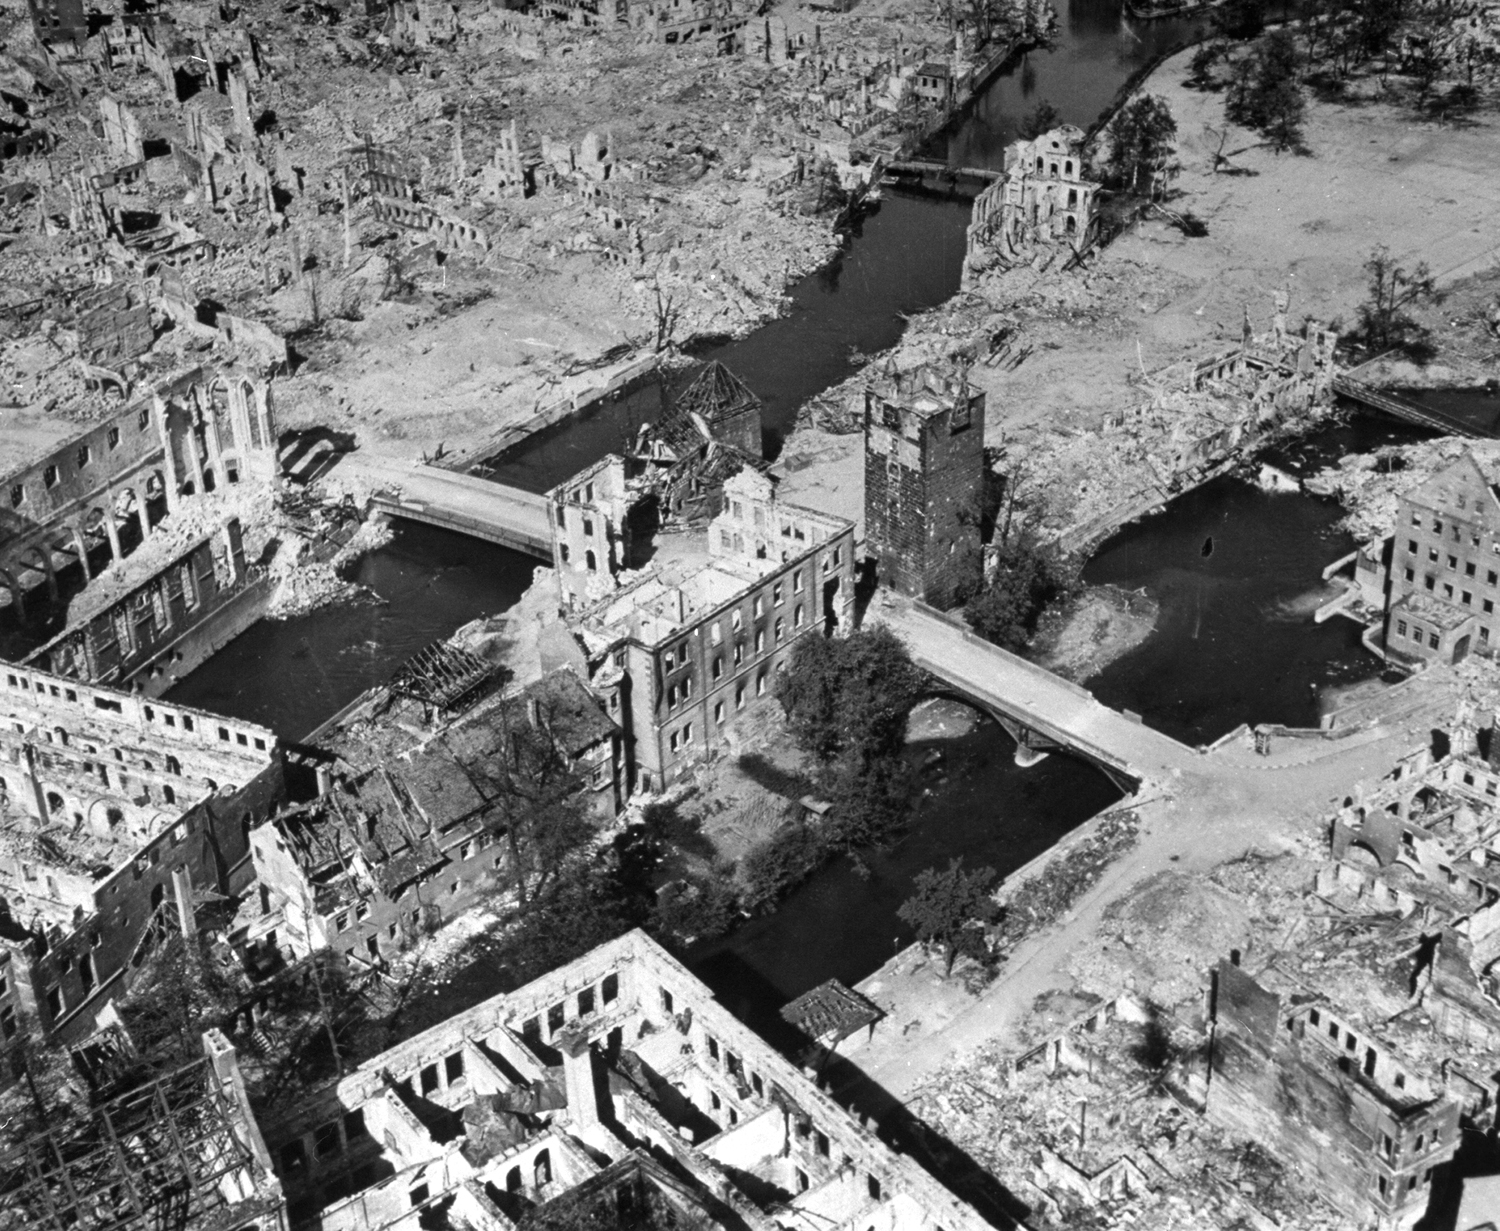 On June 2, 1945, RAF night raid of tremendous proportions wrecked key objectives in the center of the city (Nuremberg), leaving skeletal walls and leveled areas pictured.